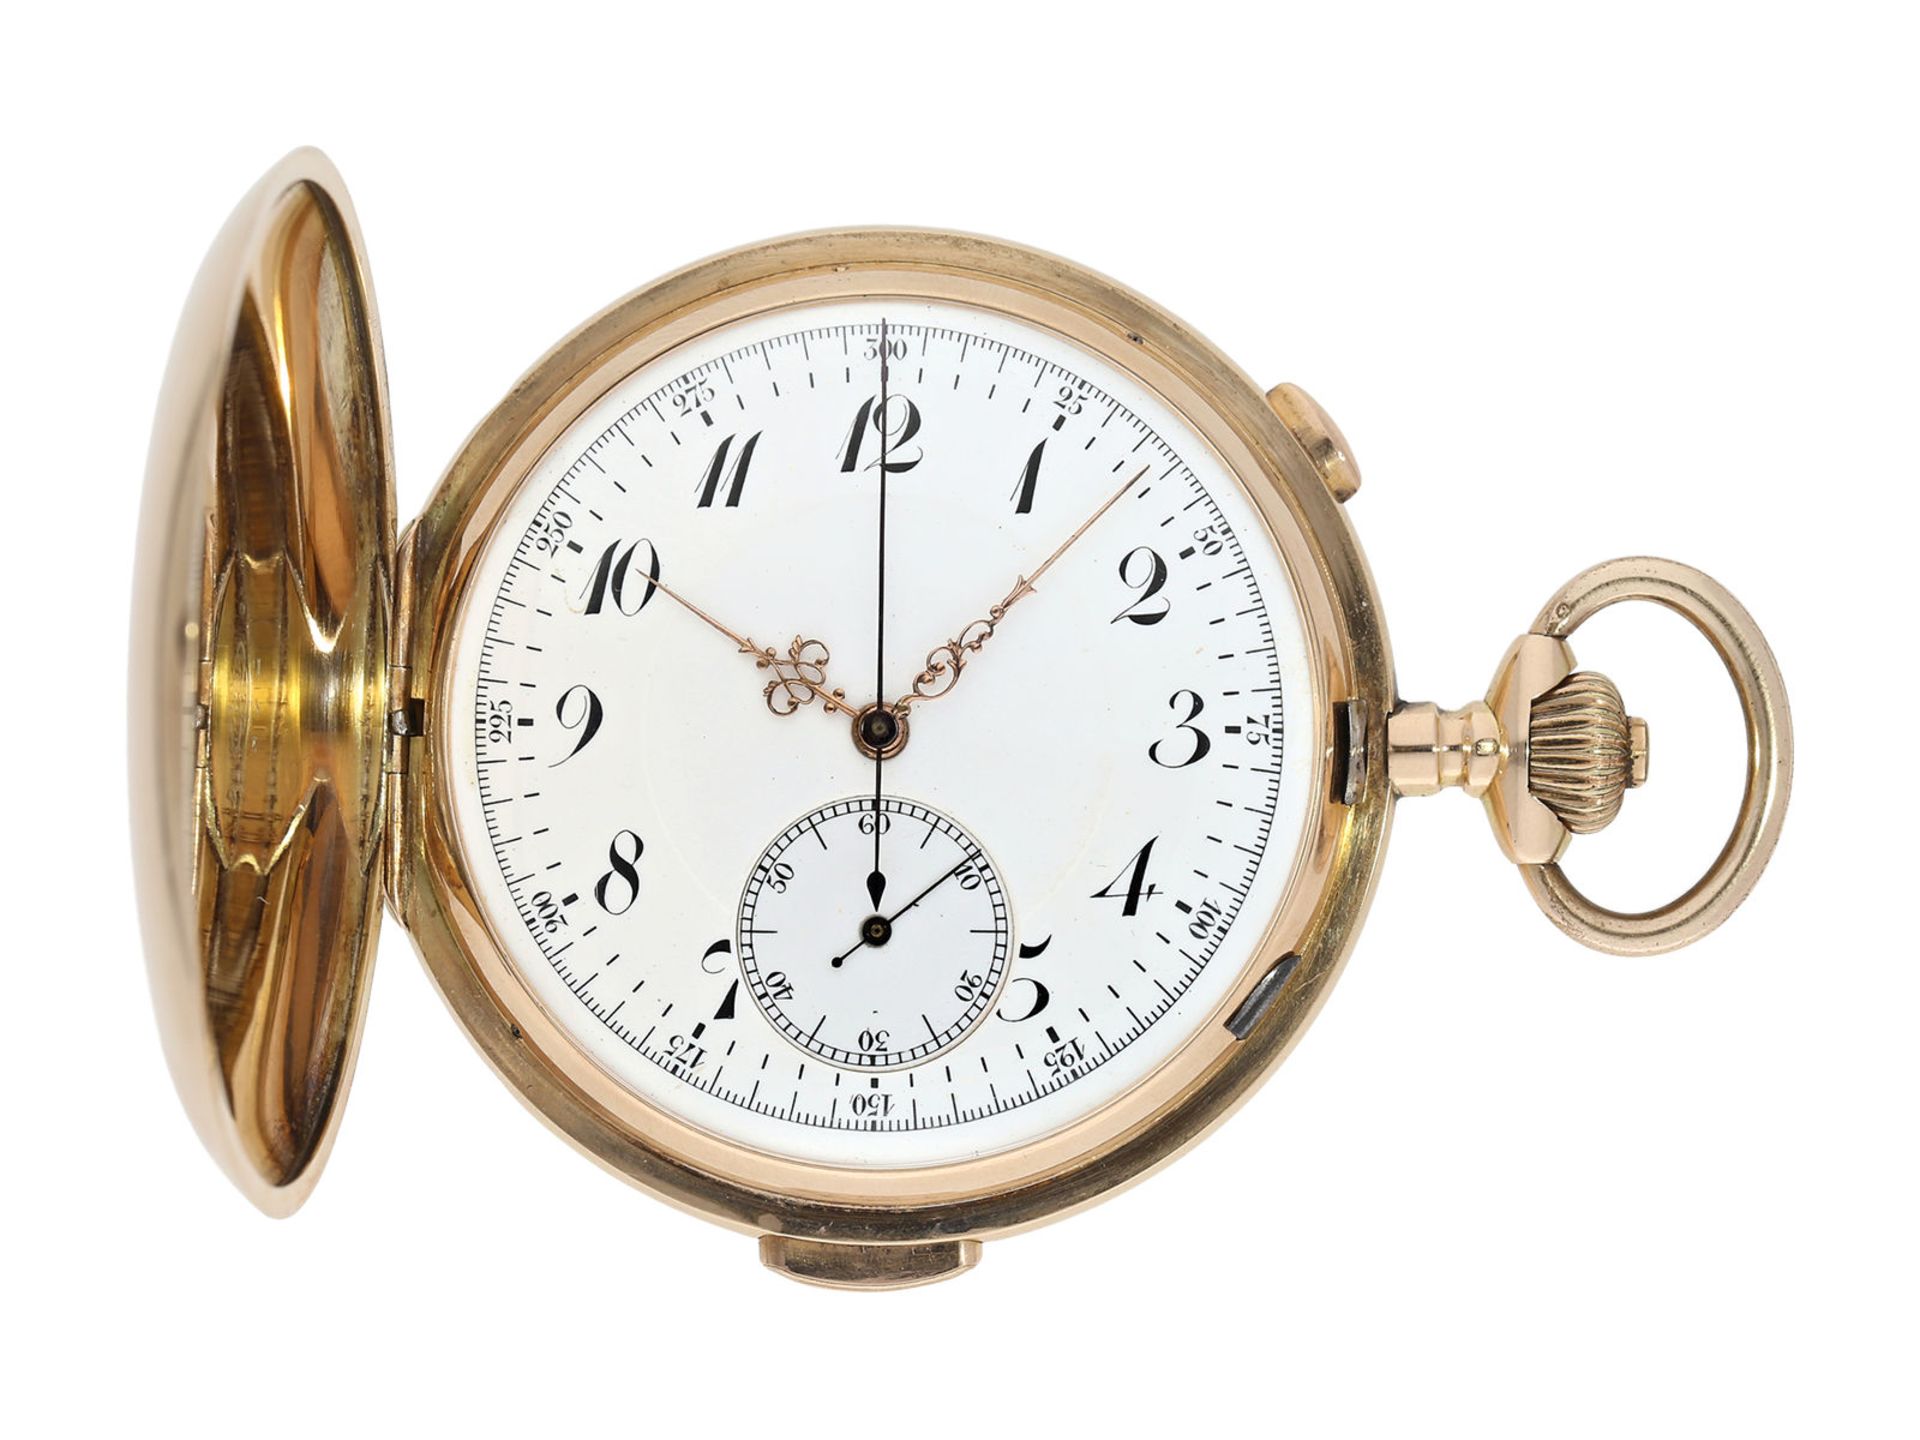 Pocket watch: large Swiss gold hunting case repeater with chronograph, brand Invicta, No. 77372, ca.